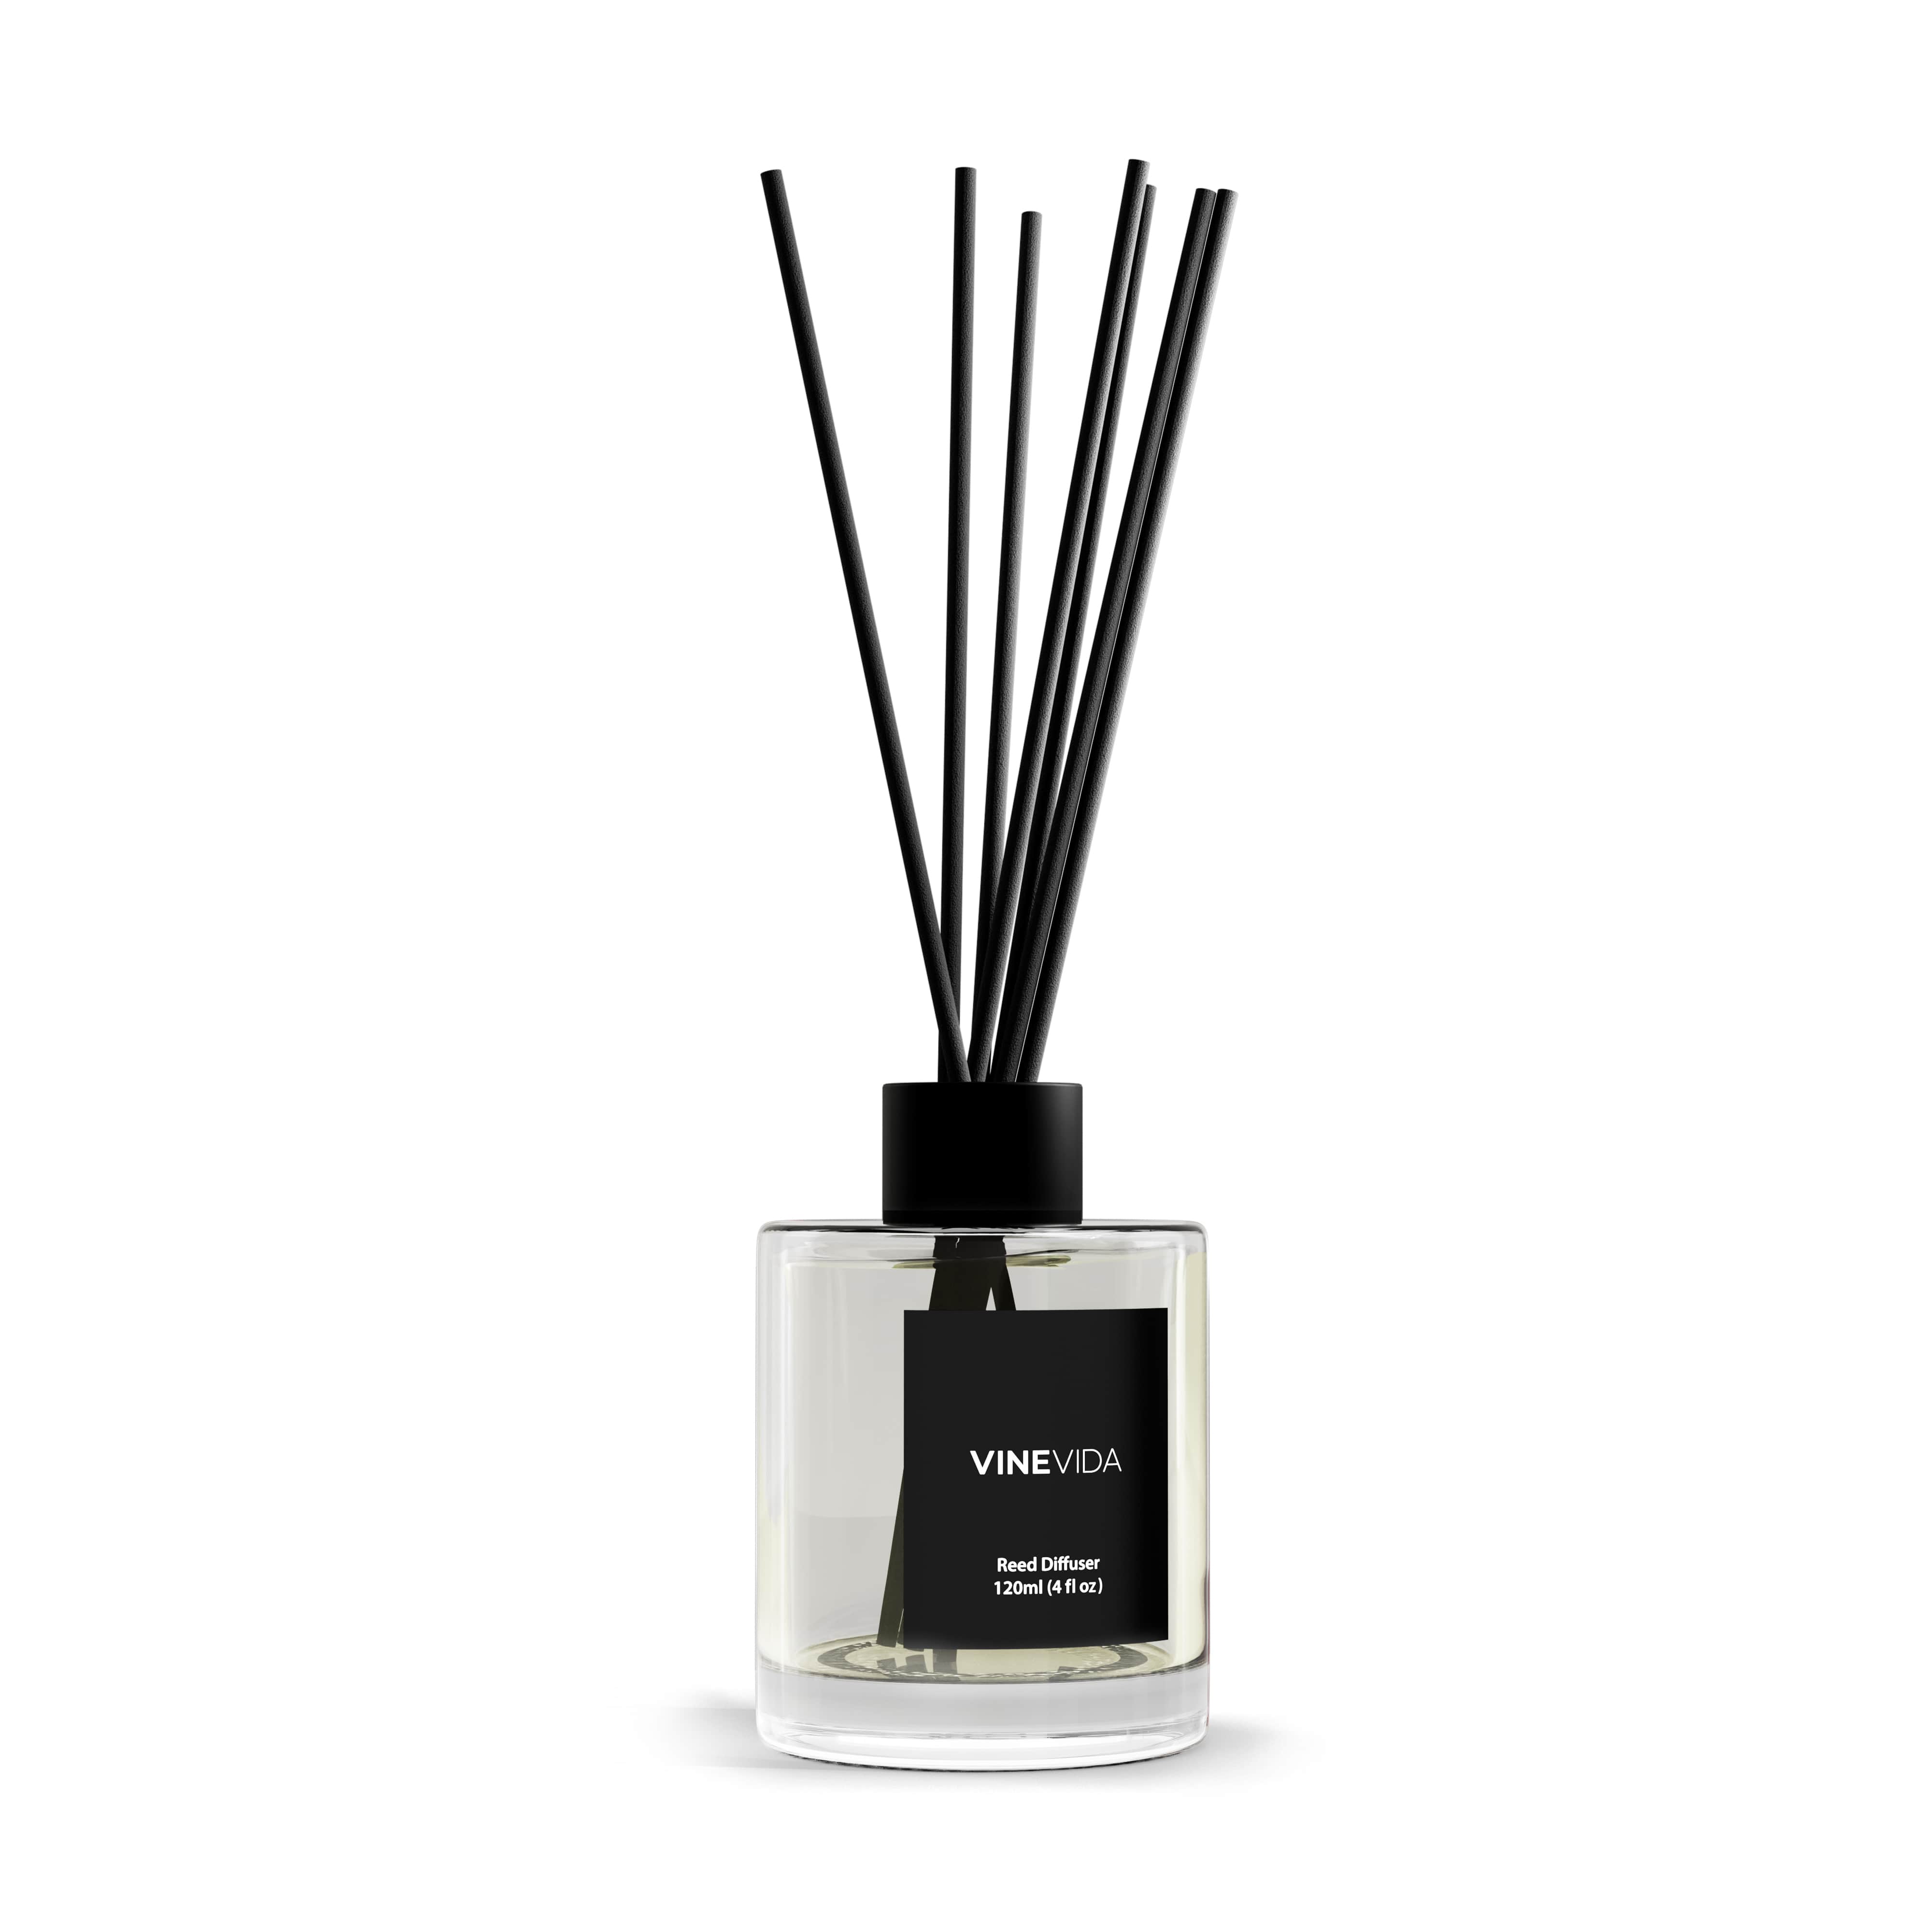 NO. 1117 Reed Diffuser - Inspired by: Salted Caramel by Bath & Body Works